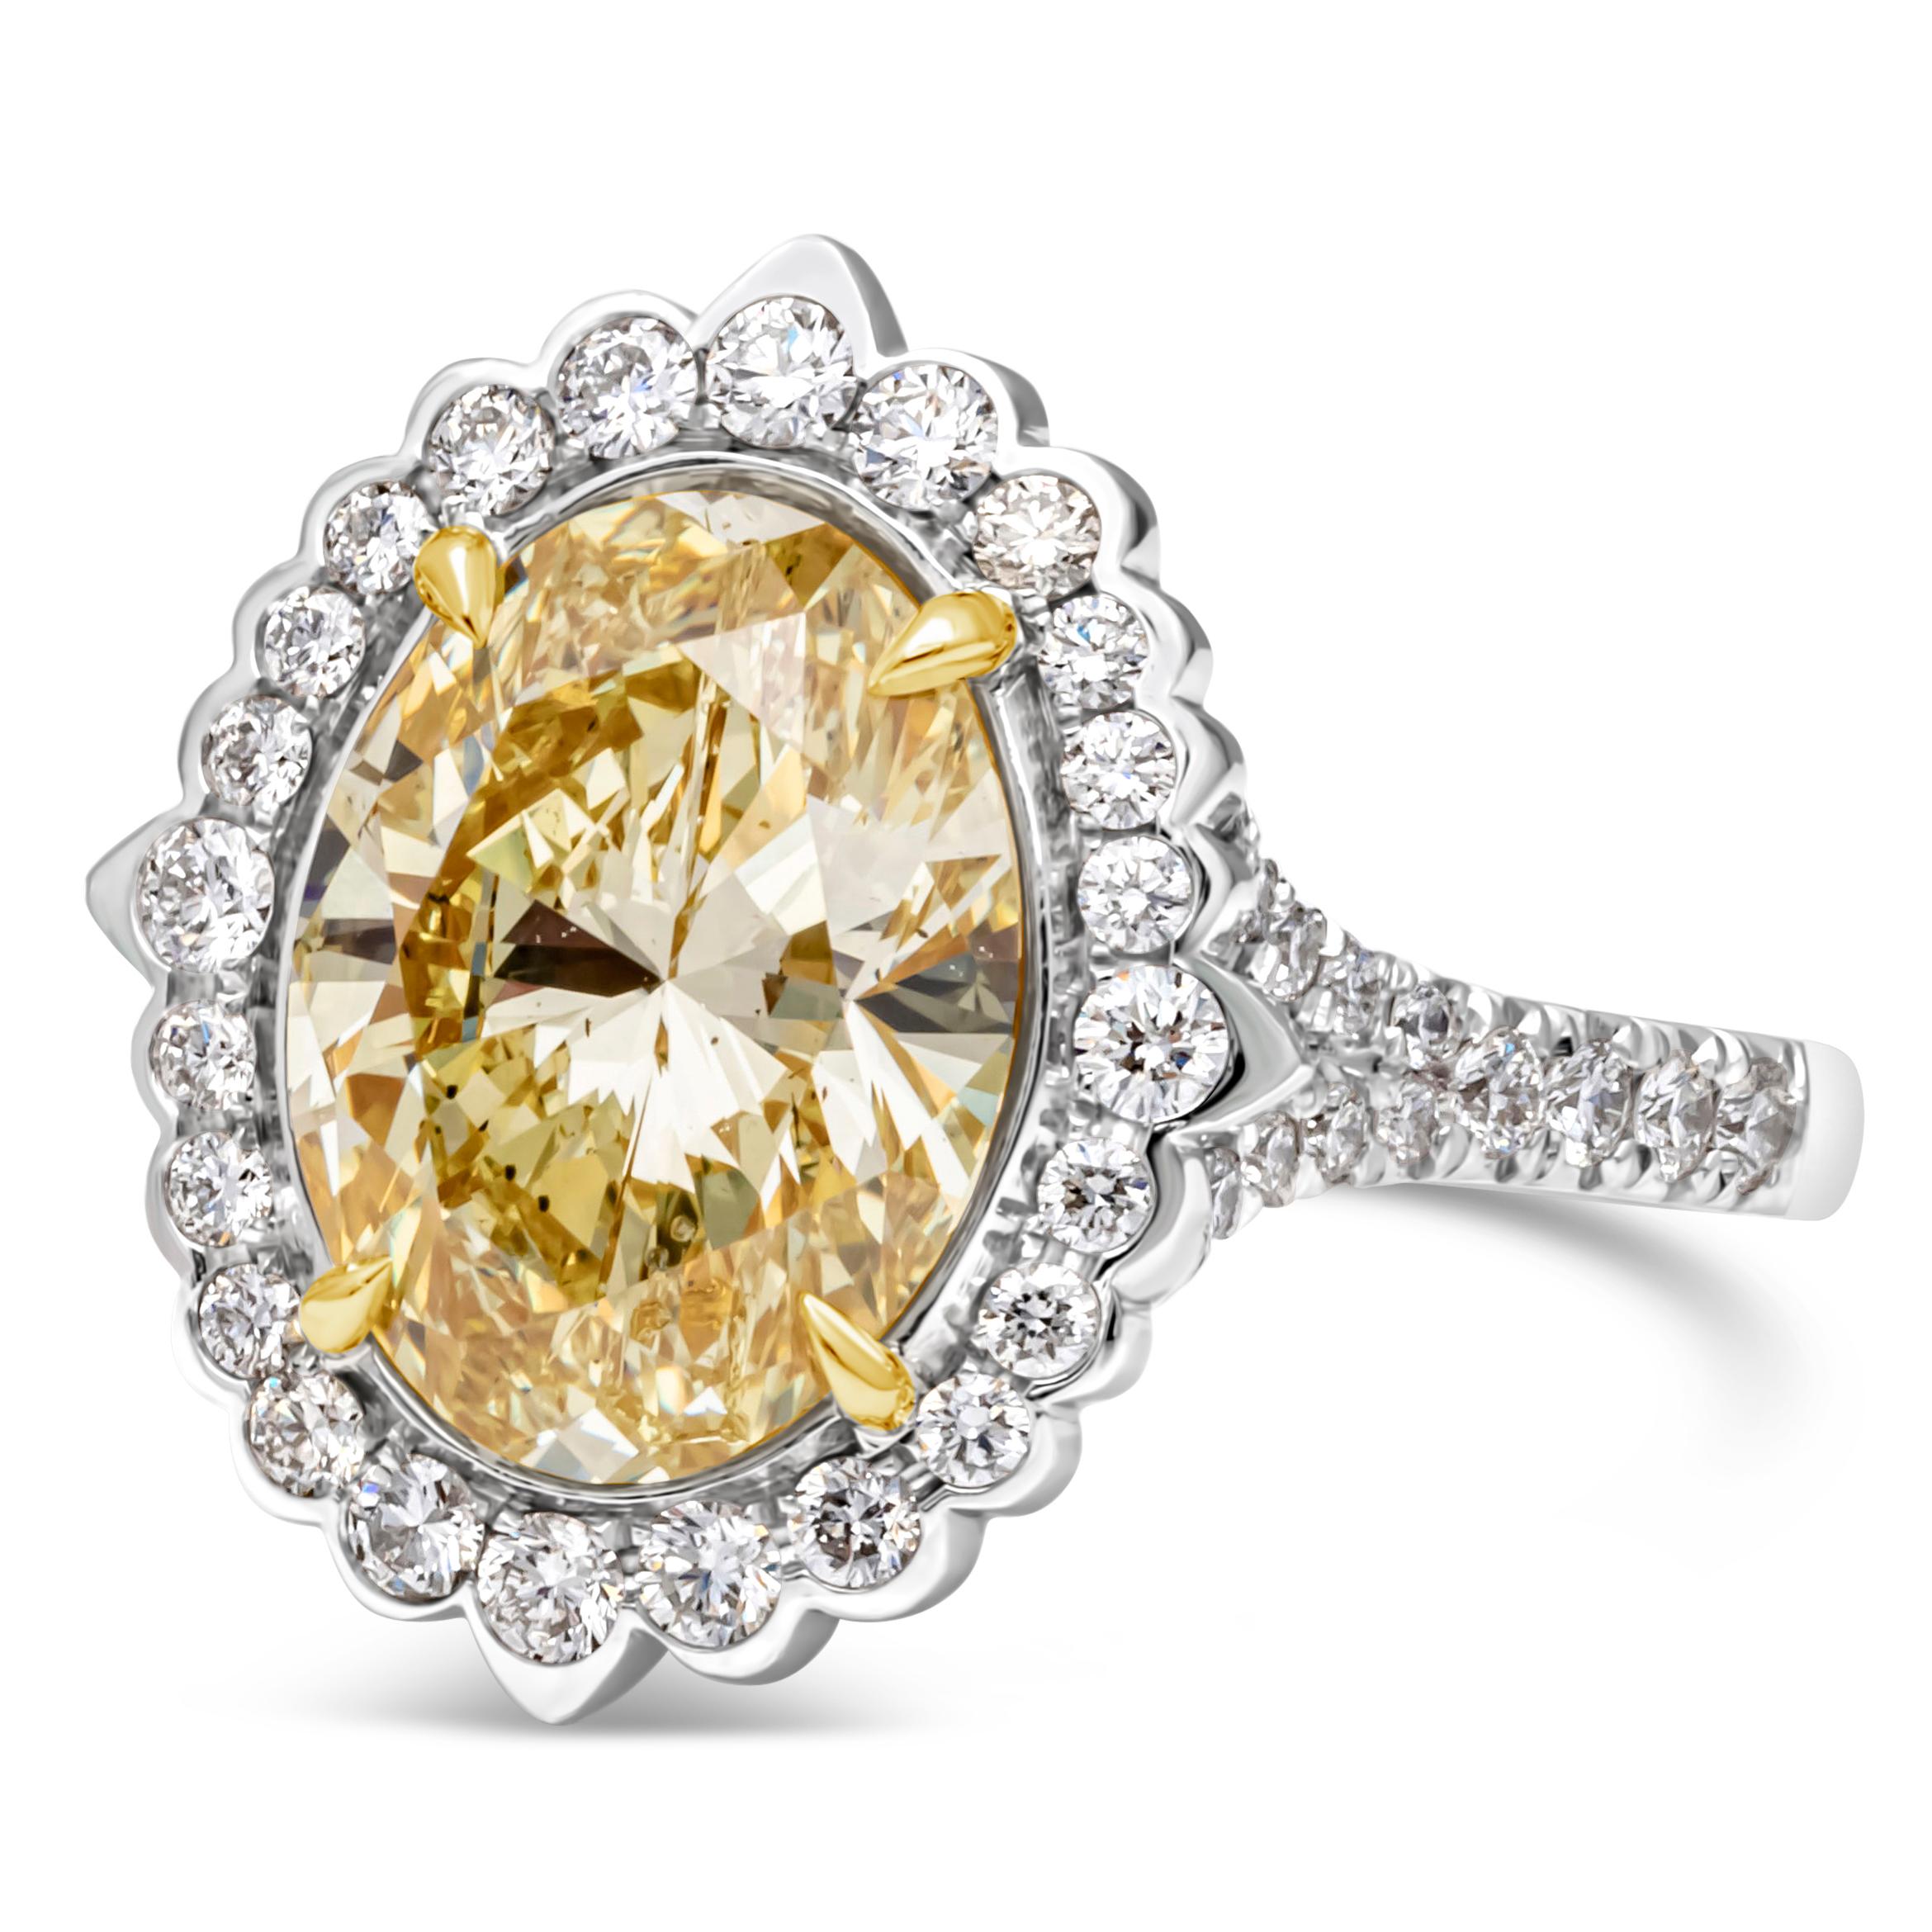 An elegant and vibrant halo engagement ring, featuring an oval cut diamond of 3.39 carats and certified by GIA as fancy intense yellow color and SI1 clarity, set in a four prong 18K yellow gold basket setting. The center stone's color is very strong